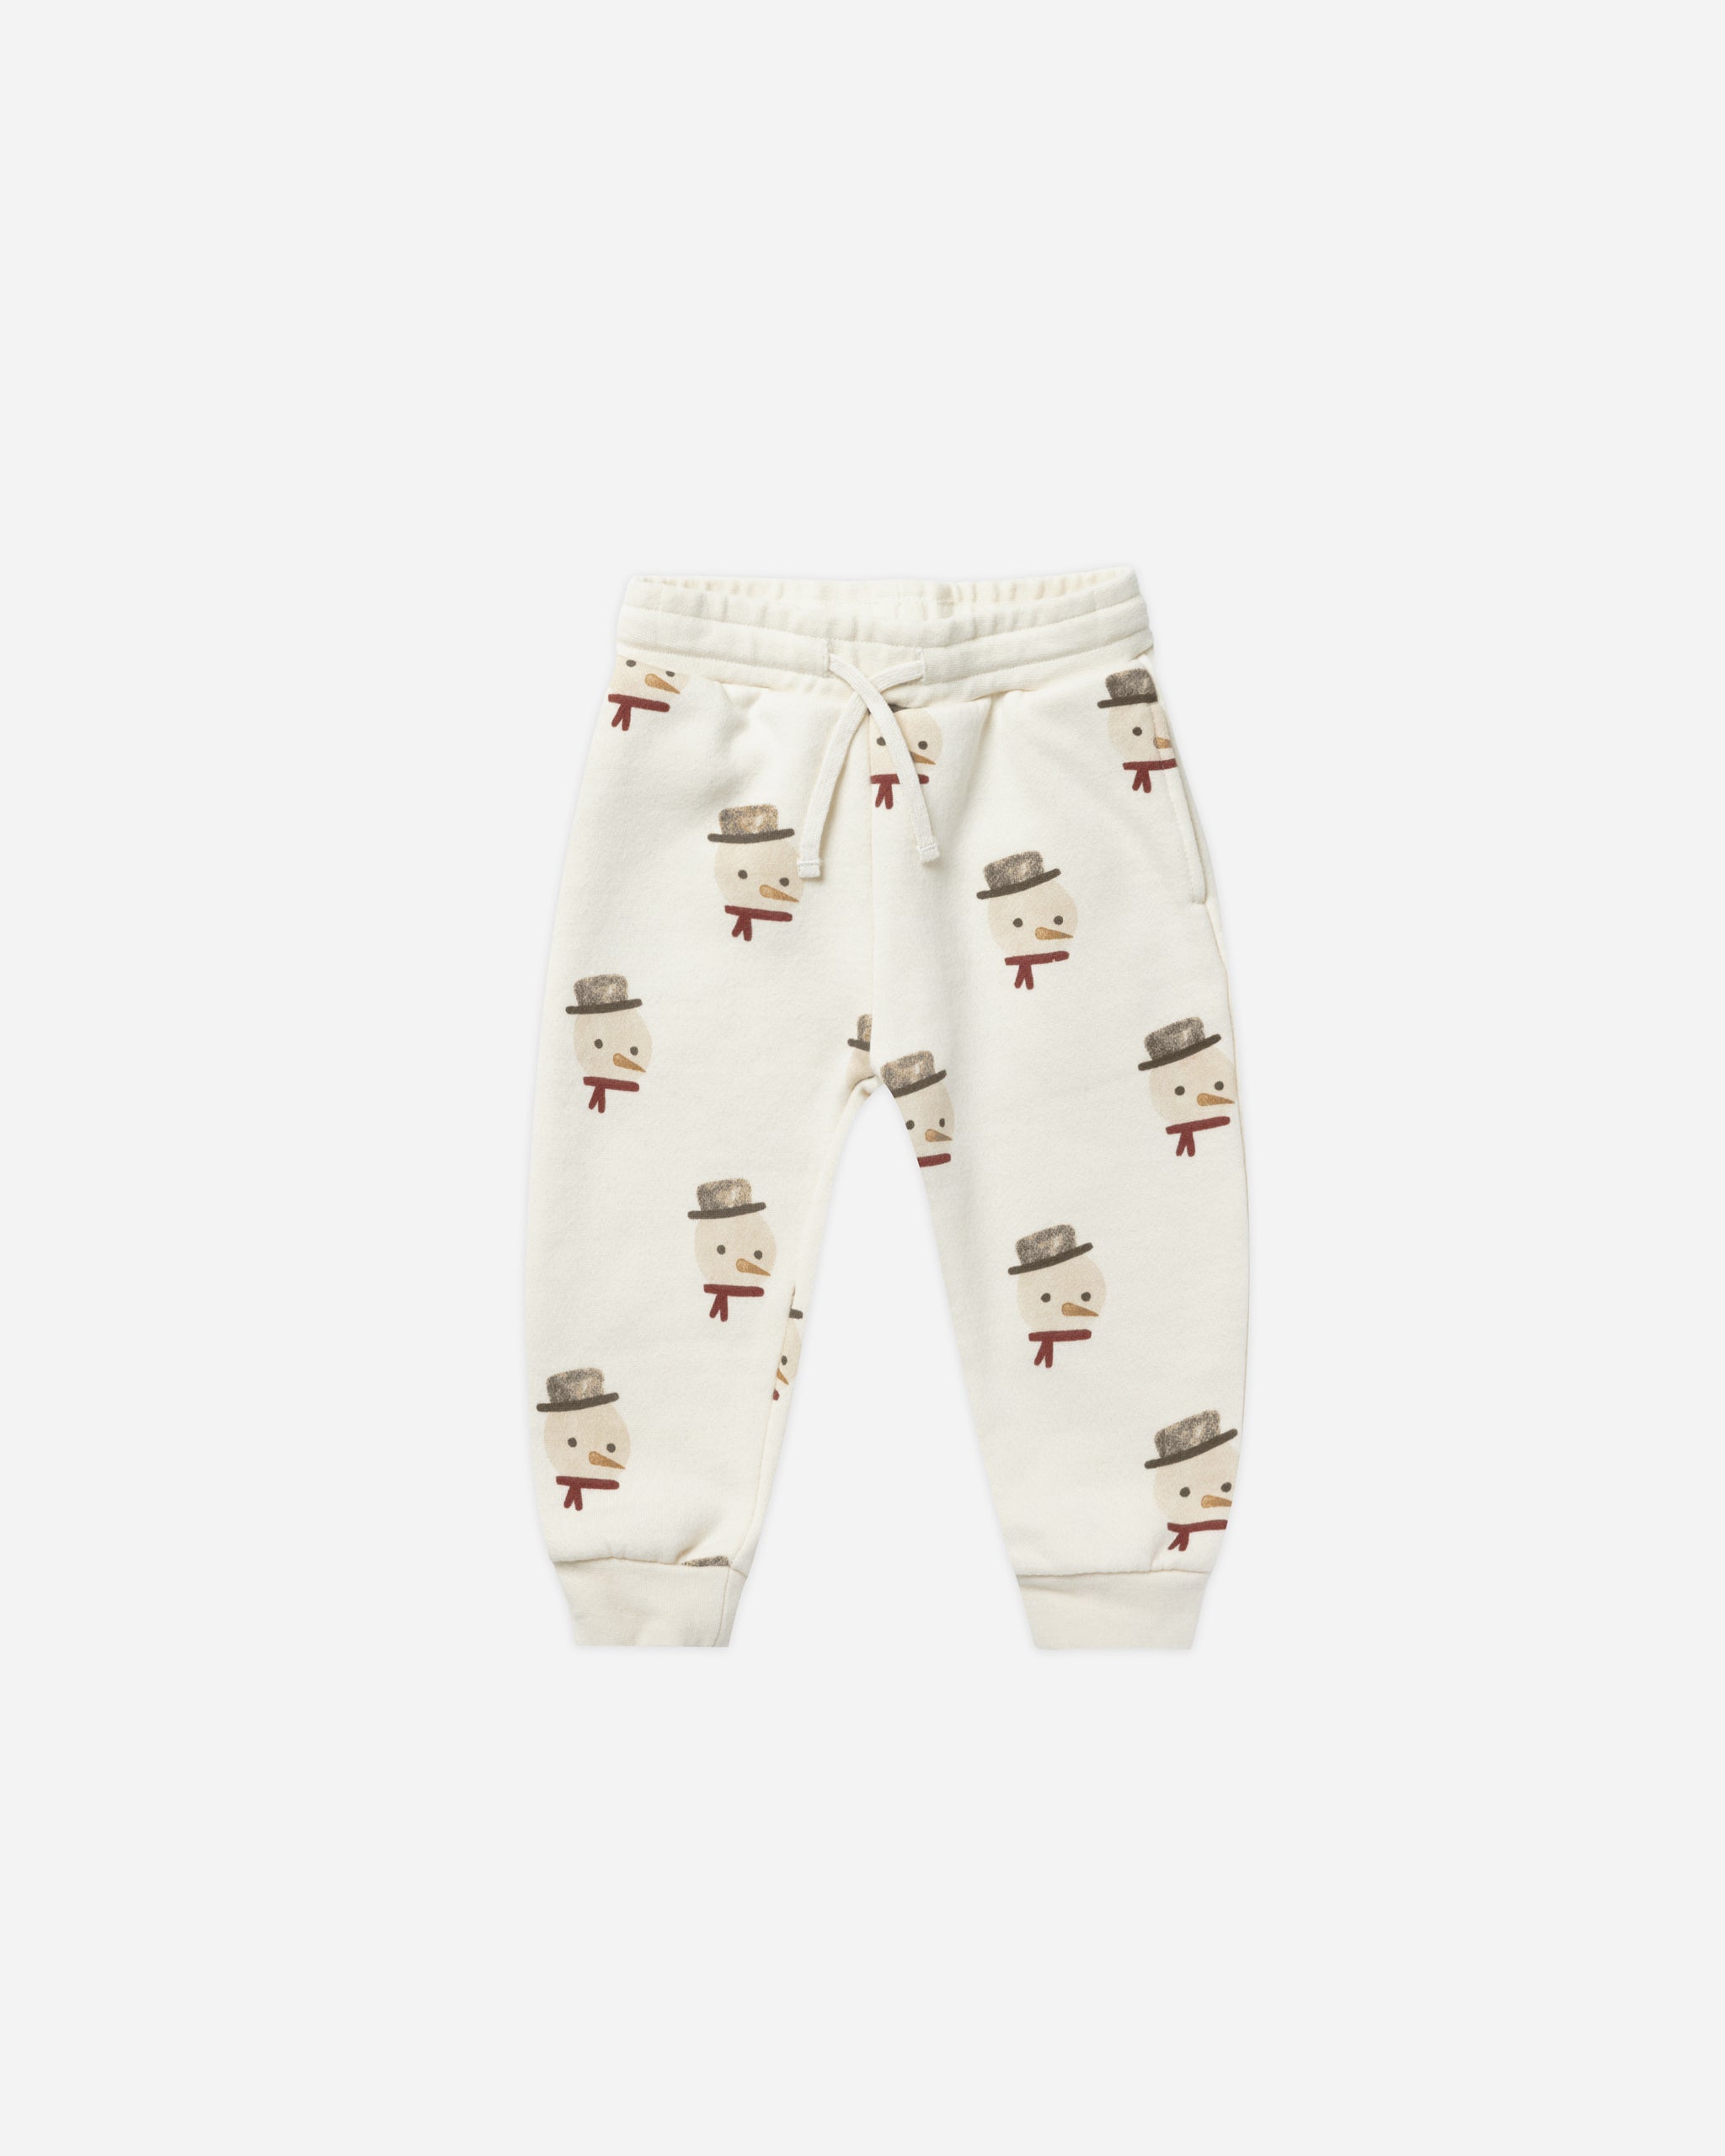 Jogger Pant || Snowman - Rylee + Cru | Kids Clothes | Trendy Baby Clothes | Modern Infant Outfits |